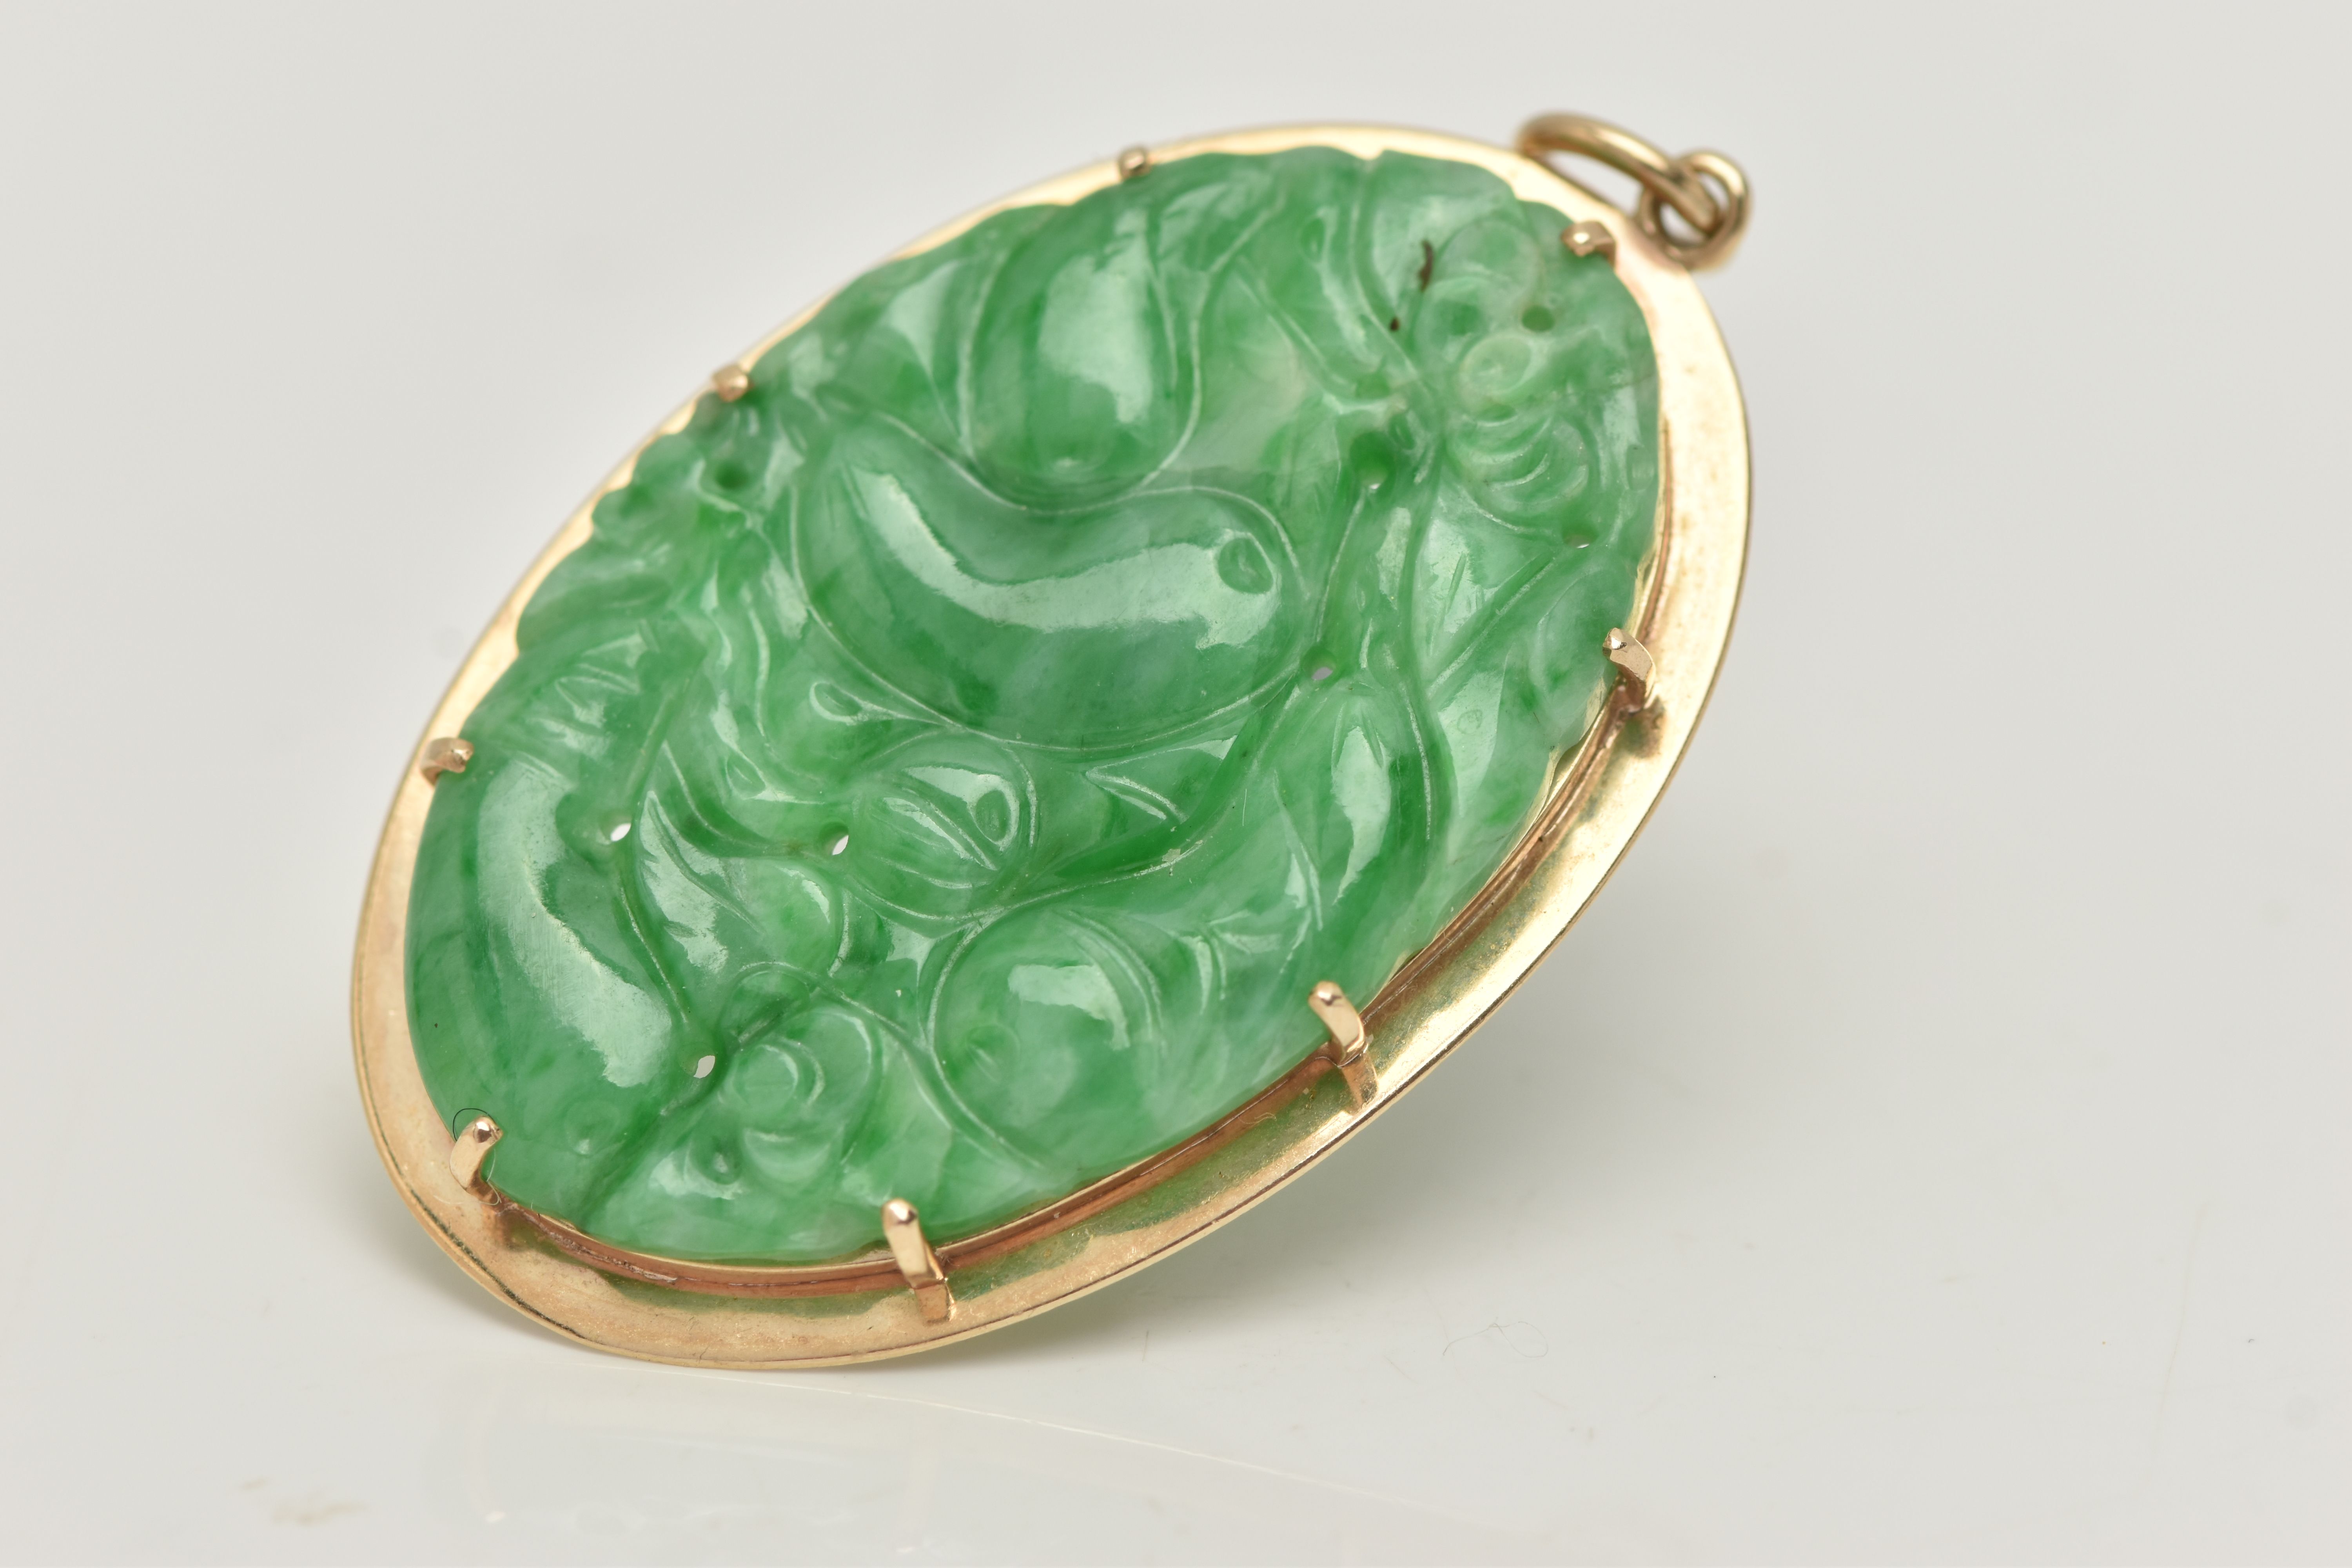 A 9CT GOLD CARVED JADE PENDANT, the oval jade panel carved to depict flowers, foliage and possibly - Image 3 of 4